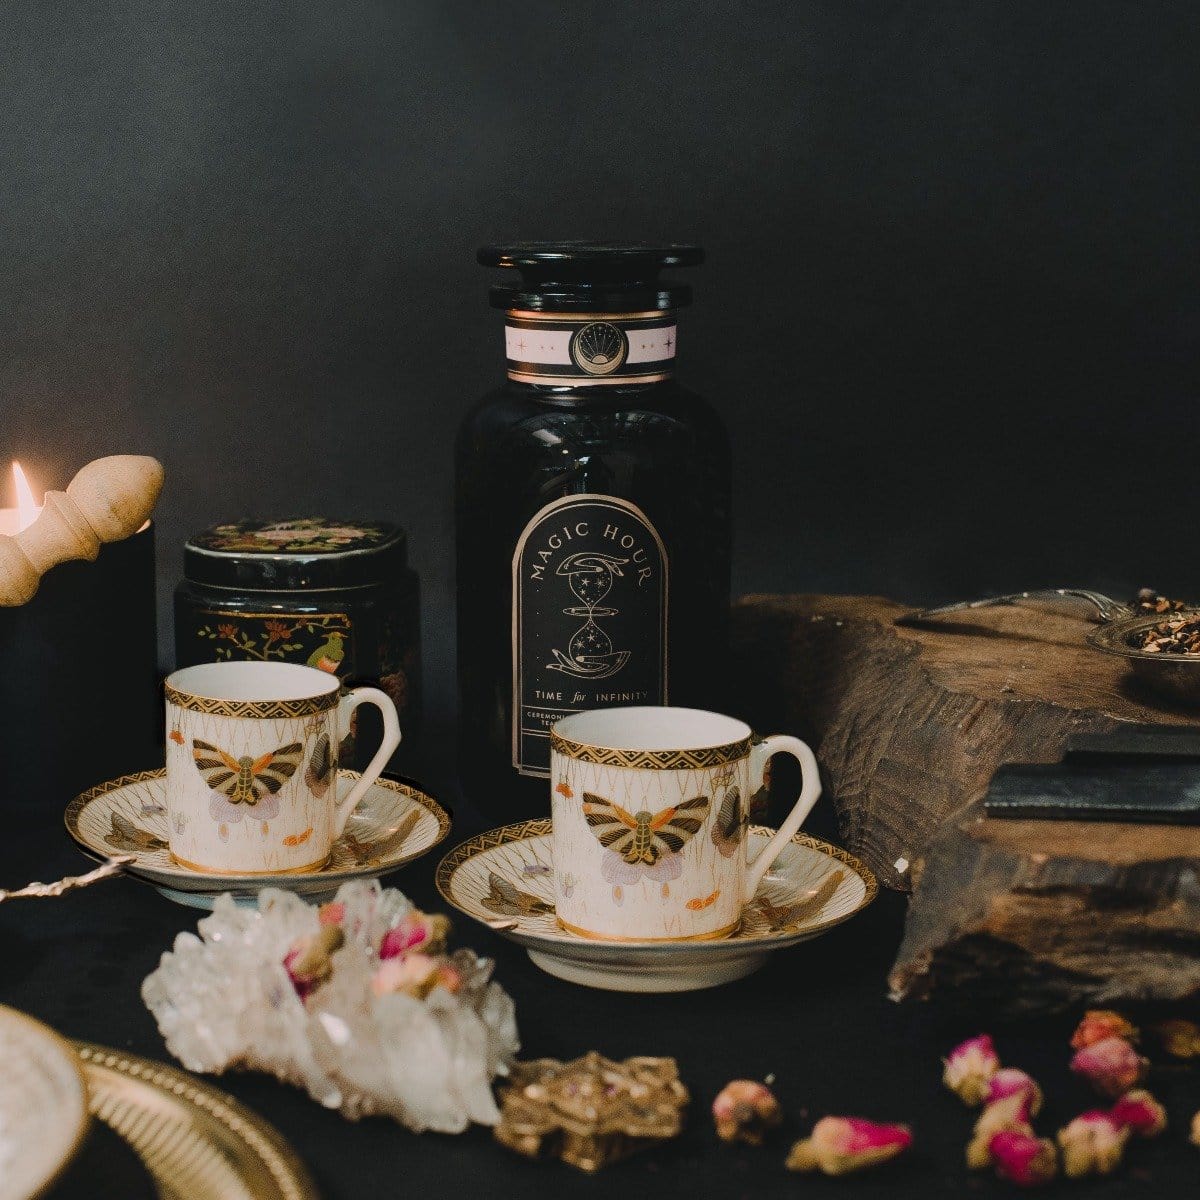 A beautifully styled scene features two ornate teacups and saucers adorned with a butterfly design. Behind the teacups is a dark bottle labeled "Gypsy Rose Black Tea" by Magic Hour and a lit candle. Other items include crystal and dried flowers, all set against a dark backdrop.